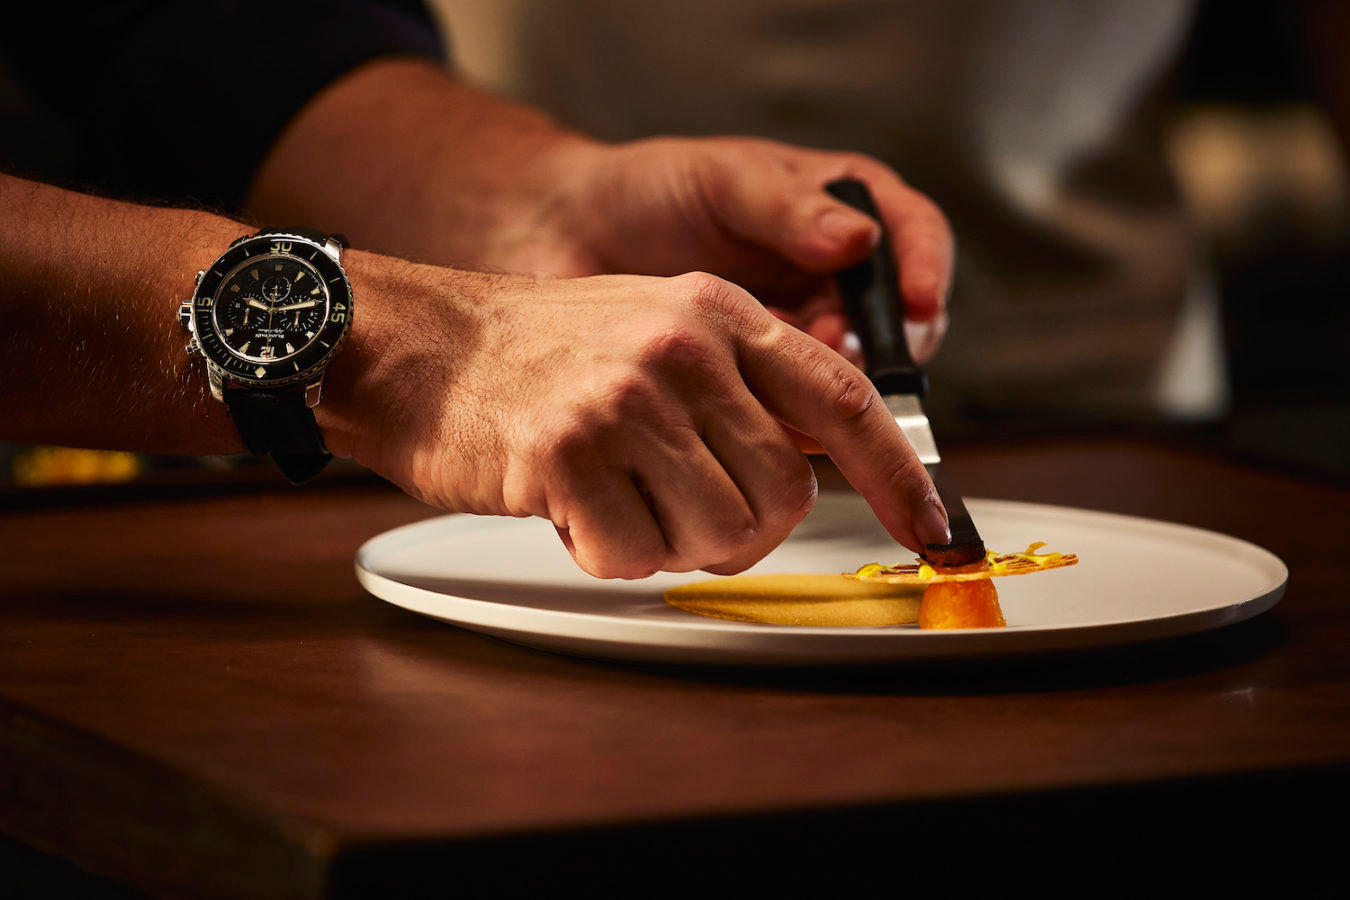 Blancpain and Sühring launch a special tasting menu for Valentine’s Day